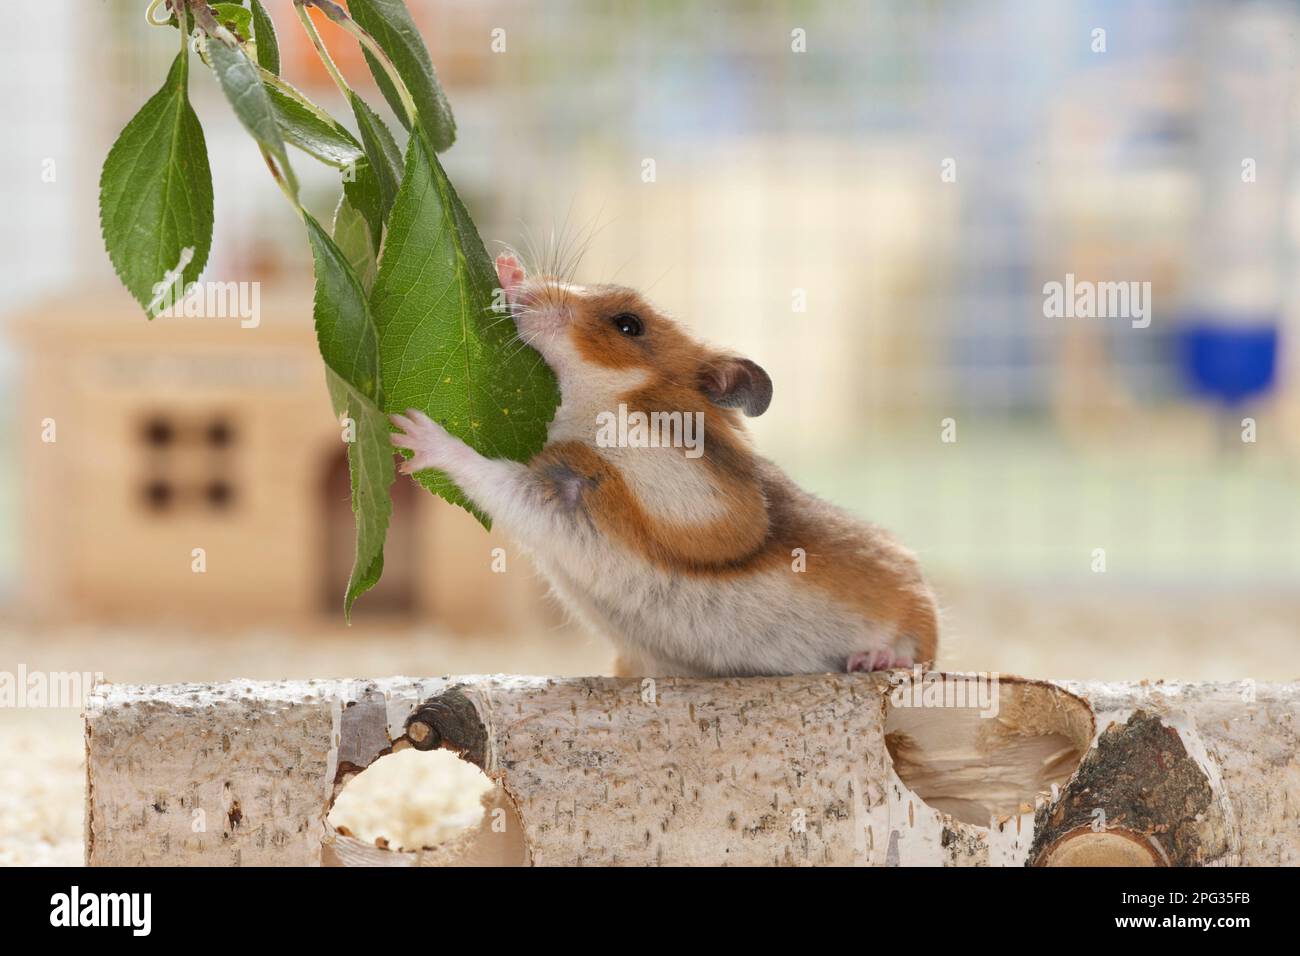 A pet golden hamster reaches out for a twig with leaves. Germany Stock Photo